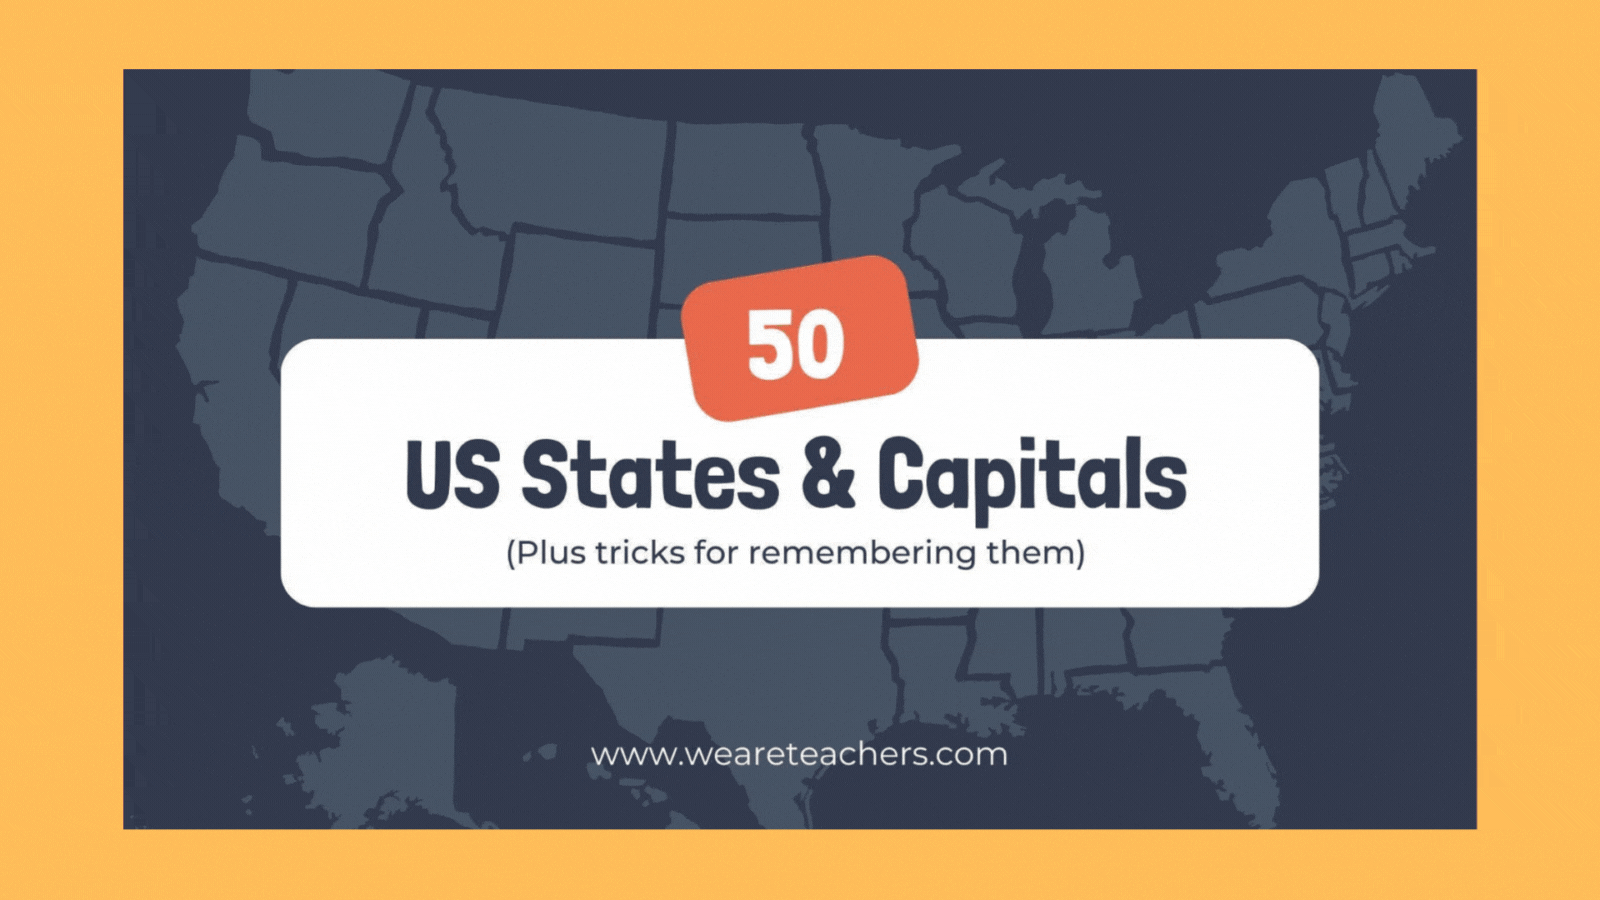 Sample slide deck featuring states and capitals